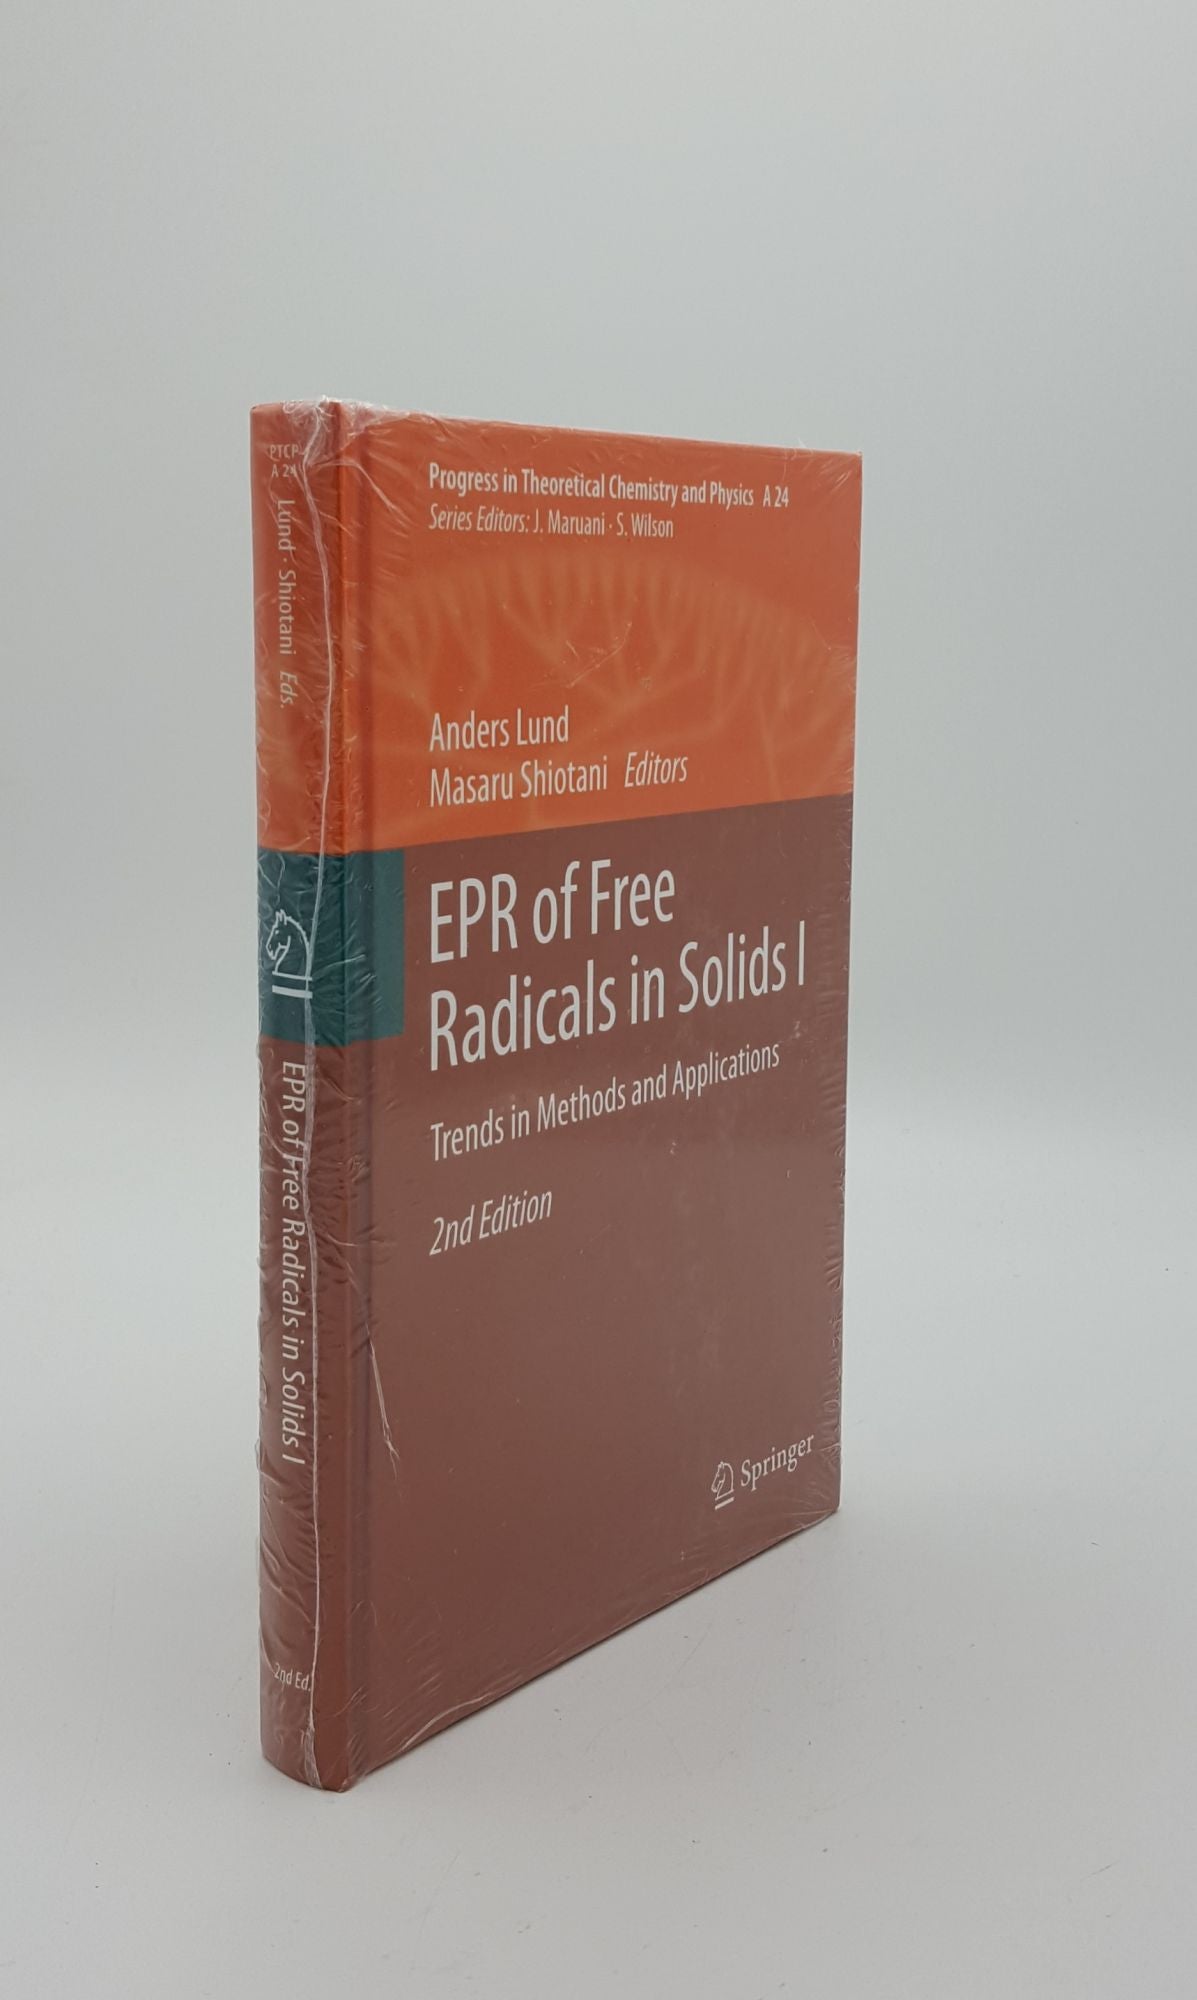 LUND Anders, SHIOTANI Masaru - Epr of Free Radicals in Solids I Trends in Methods and Applications (Progress in Theoretical Chemistry and Physics)